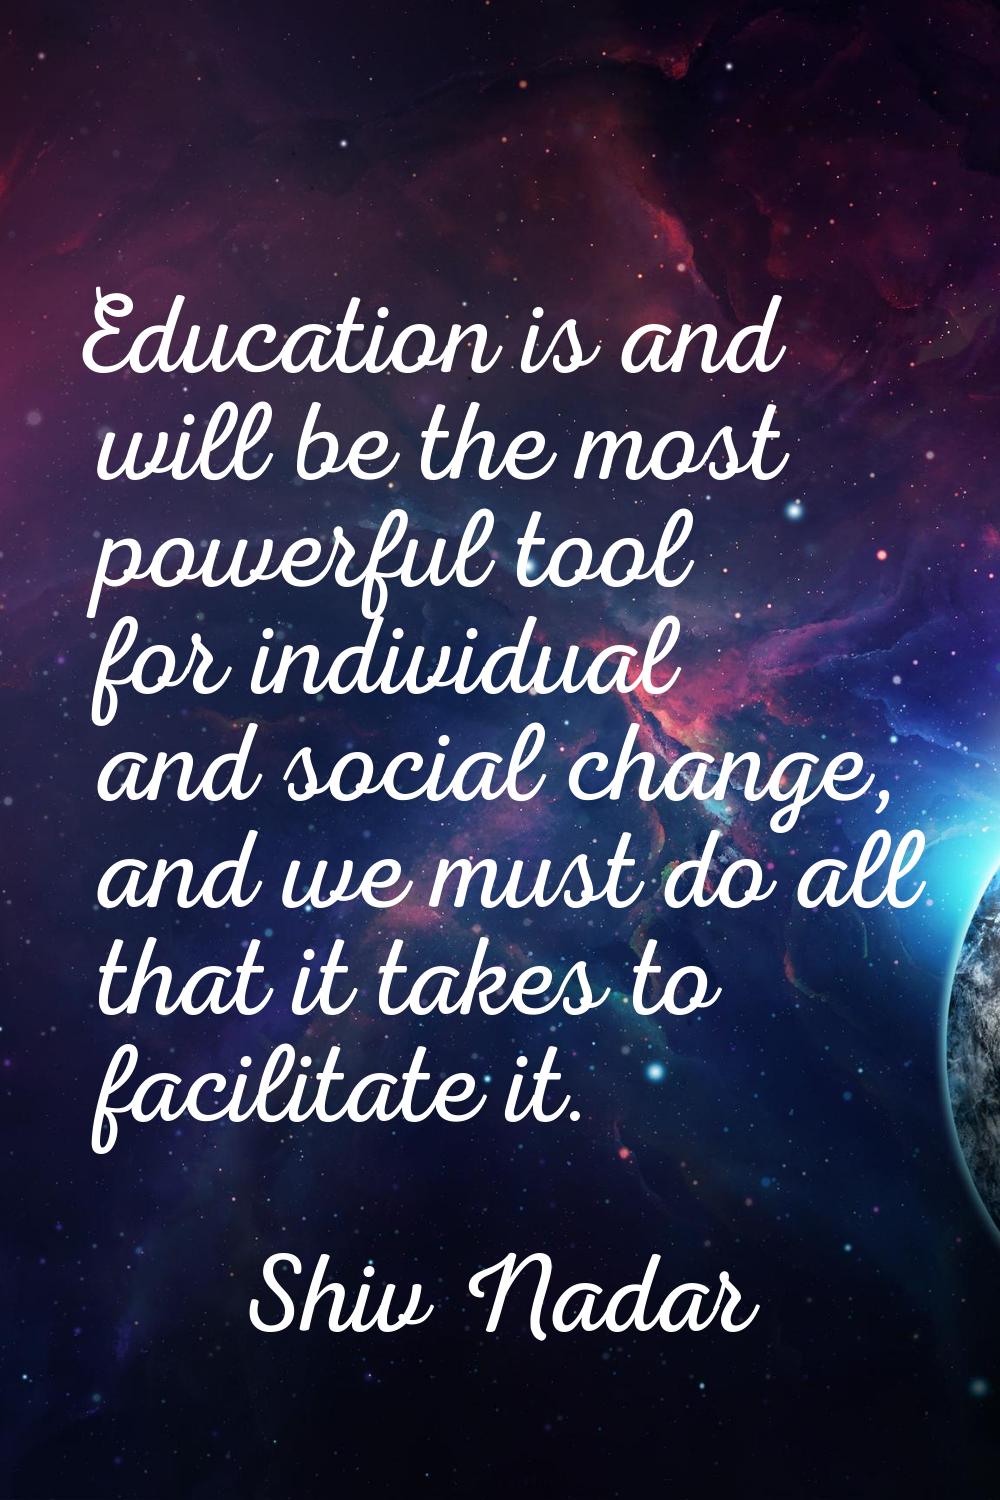 Education is and will be the most powerful tool for individual and social change, and we must do al